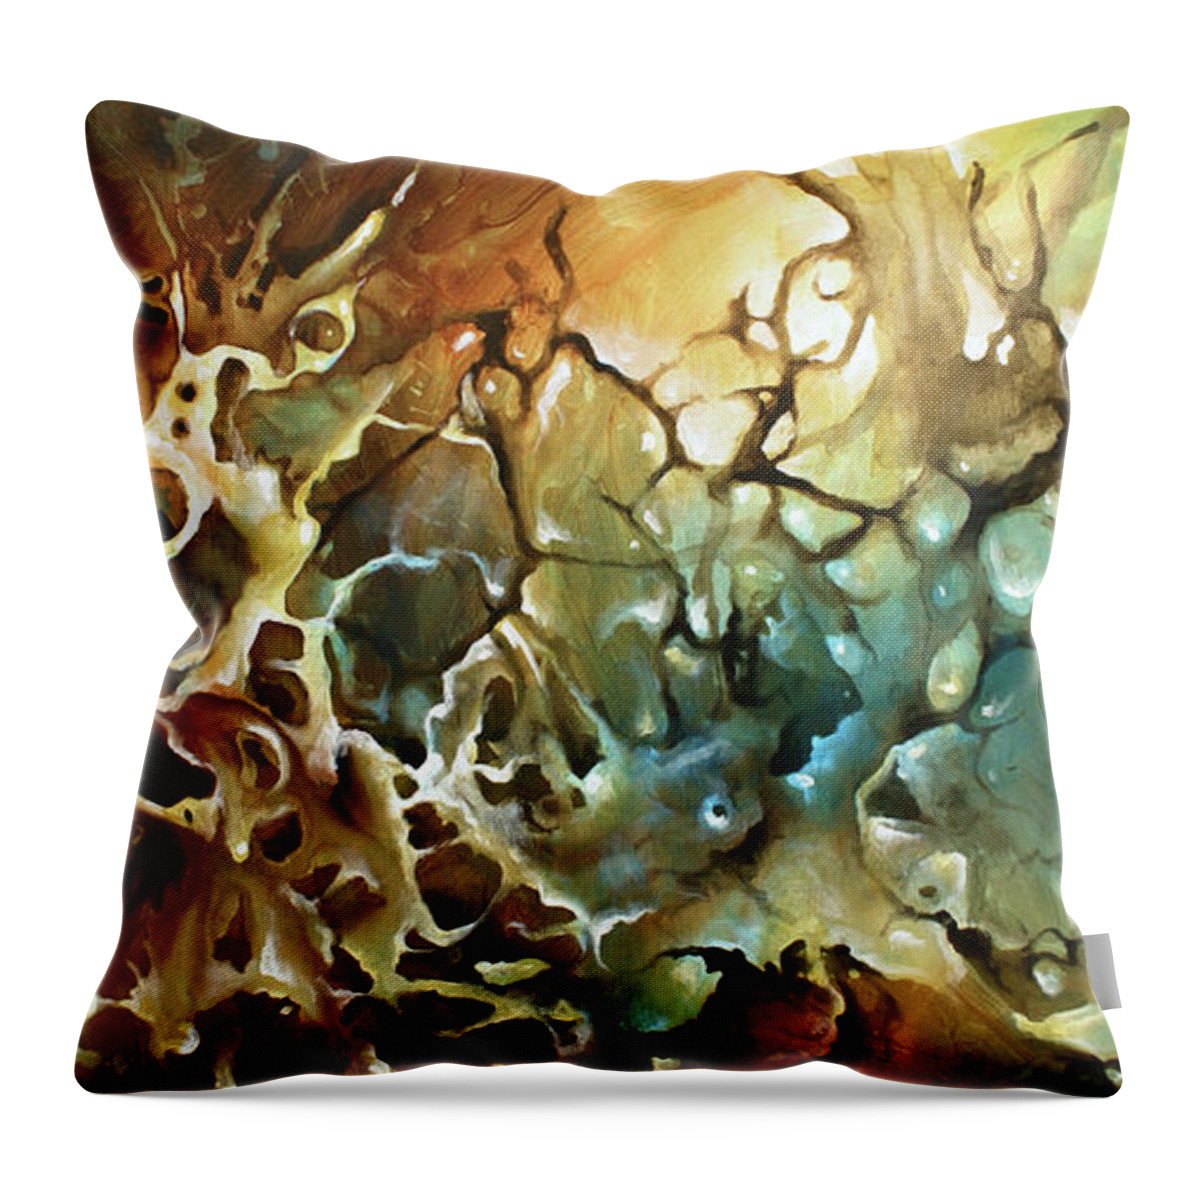 Abstract Throw Pillow featuring the painting Visions by Michael Lang